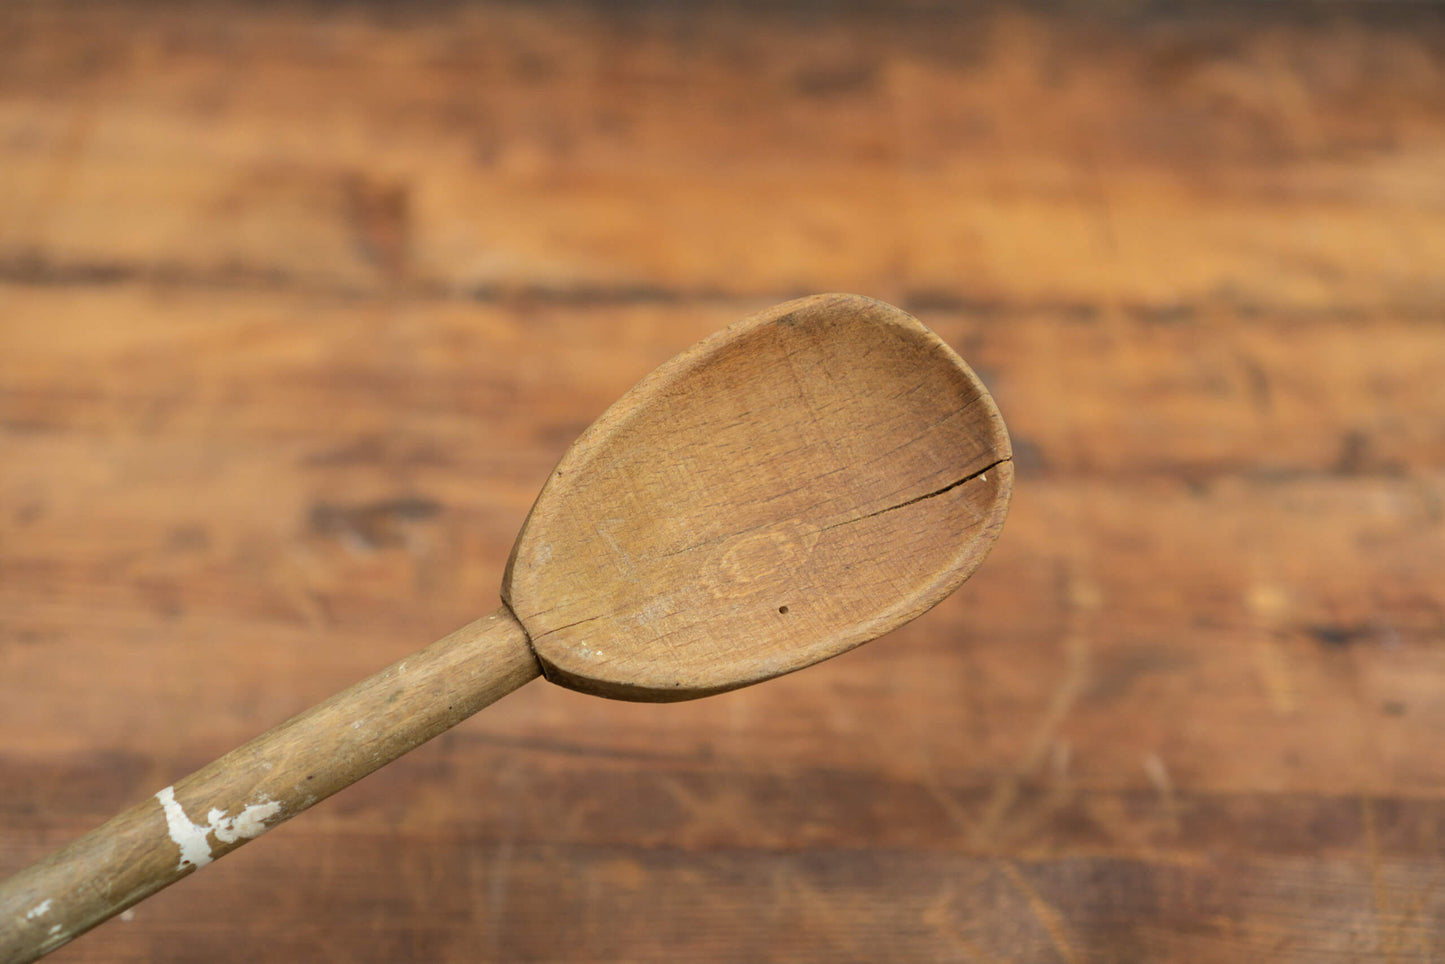 vintage wooden spoons for the victorian farmhouse style kitchen. Three spoons atop a wooden table with a blurred brick wall in the background.